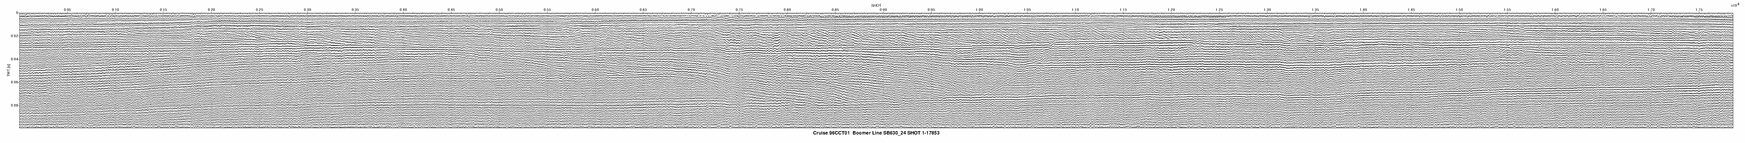 SB630_24 seismic profile thumbnail image with link to full size image